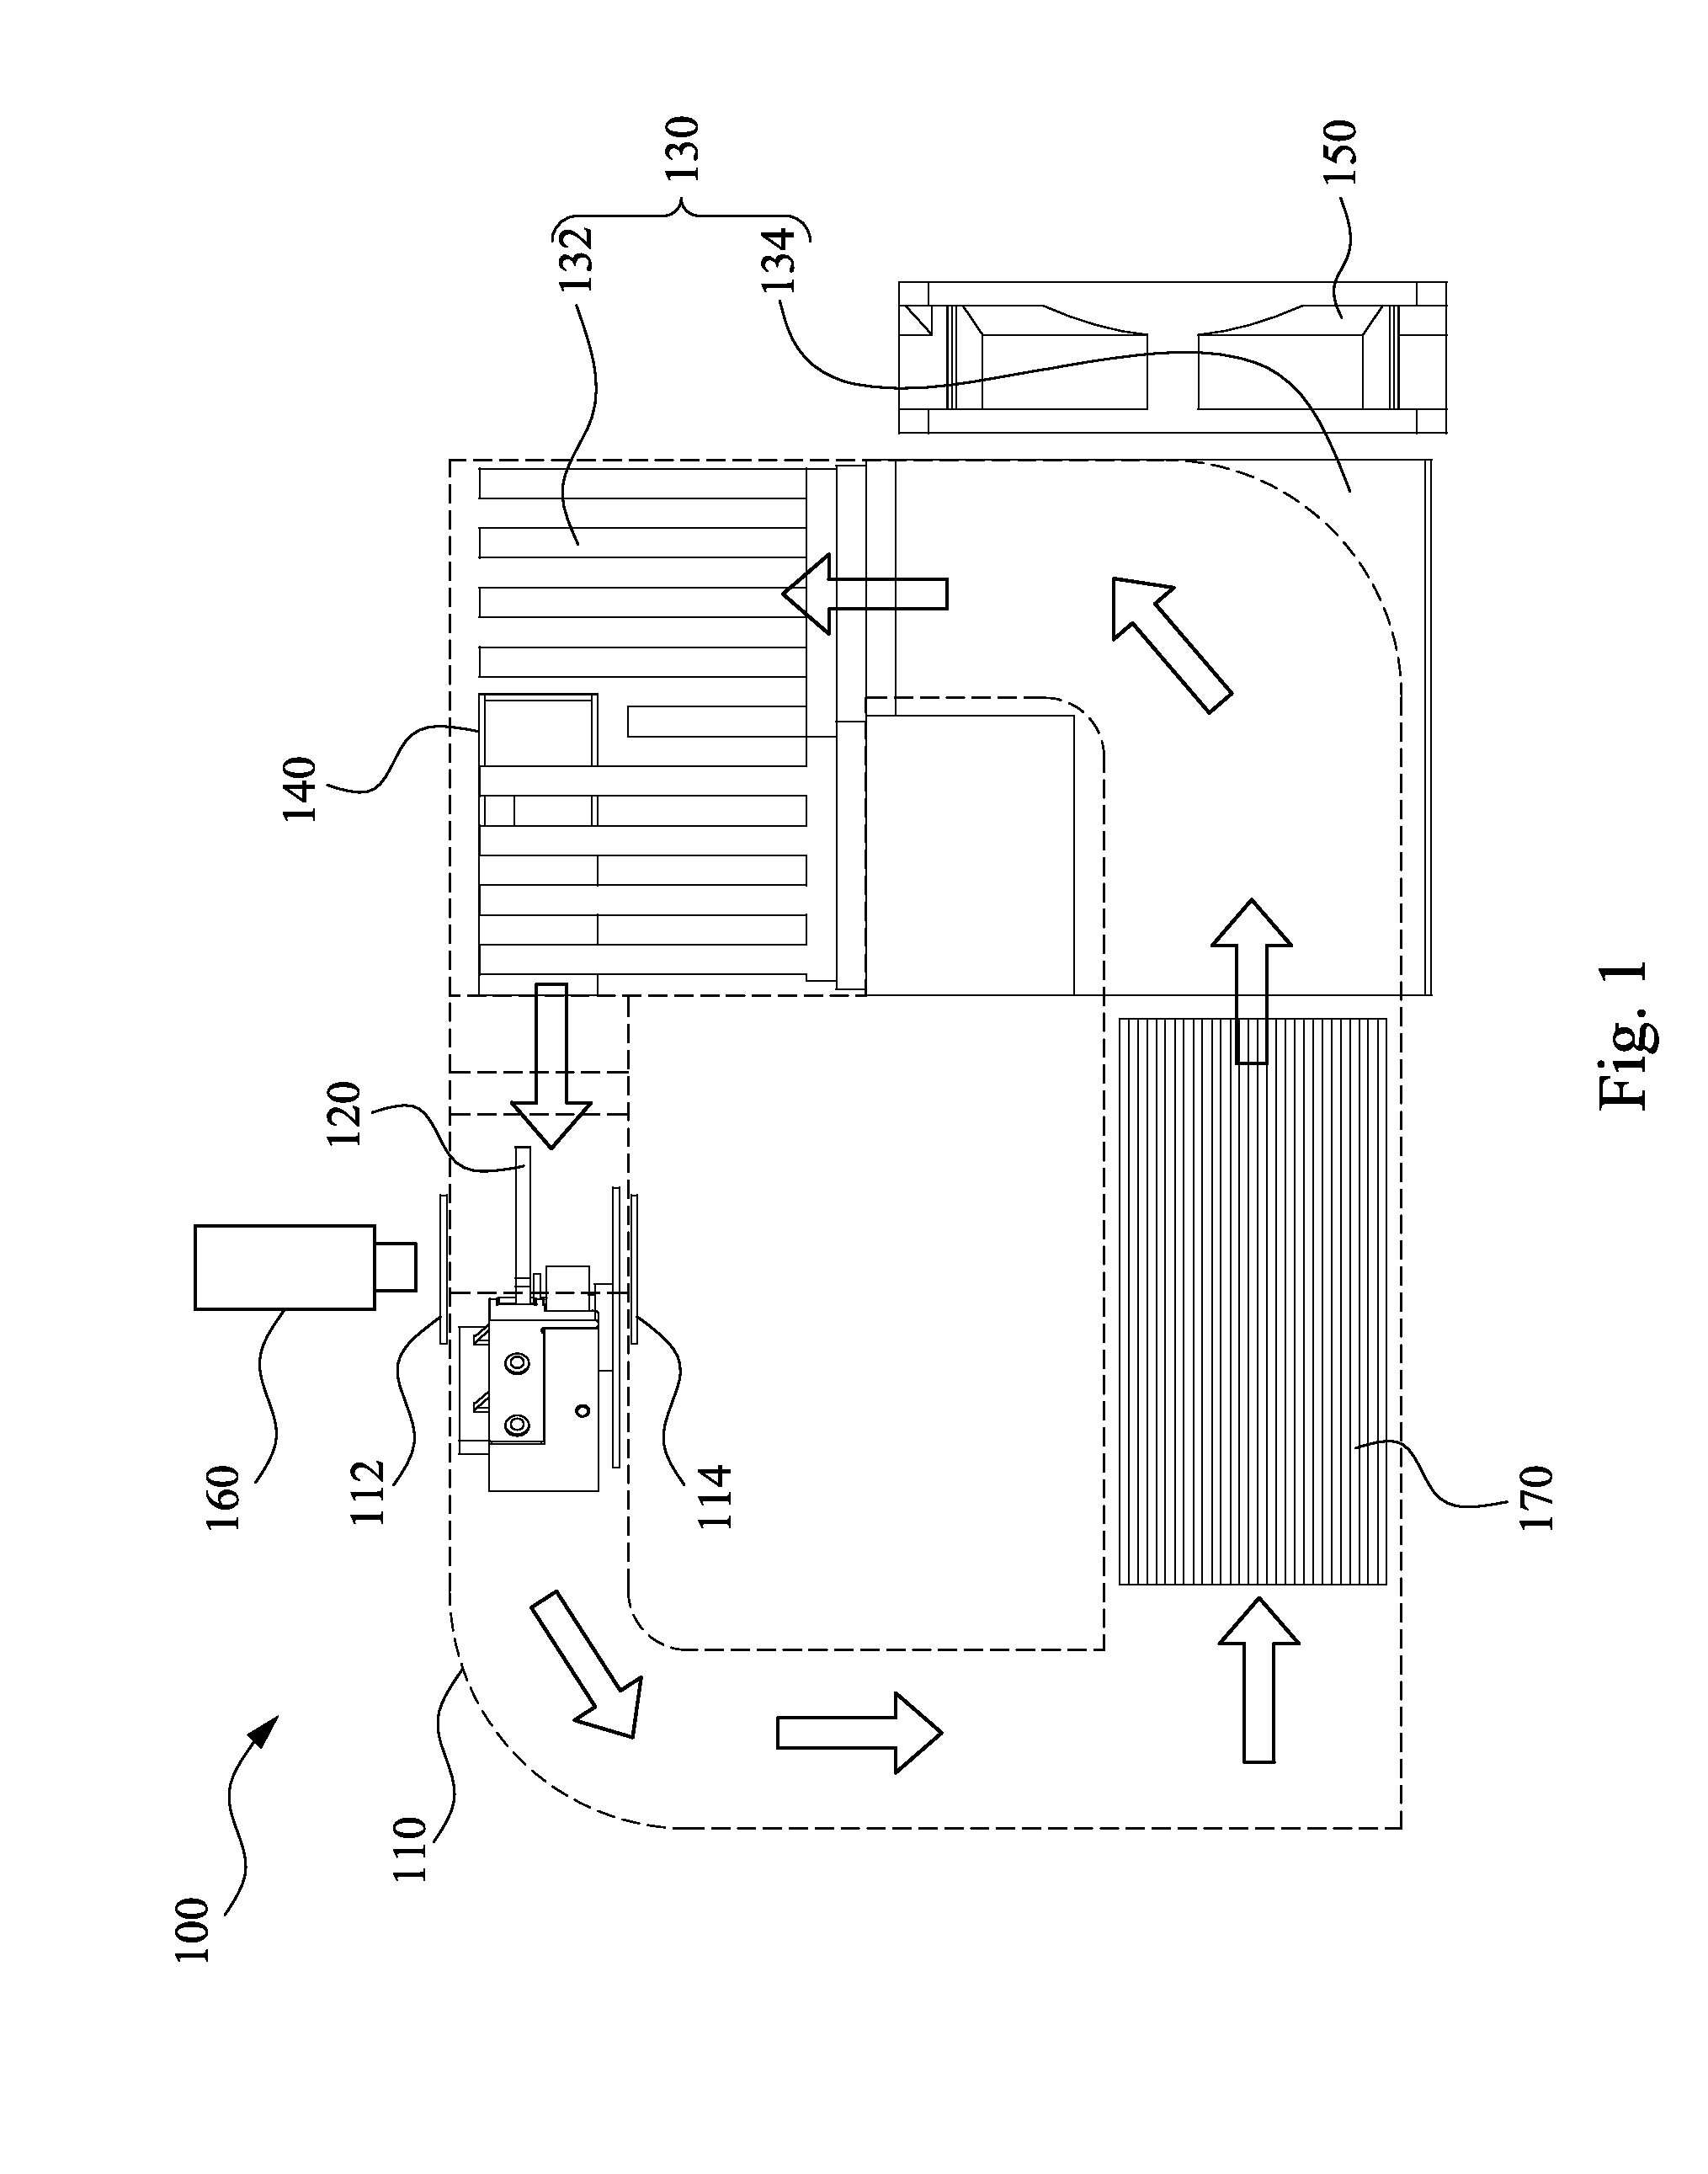 Optical device utilized in laser projector